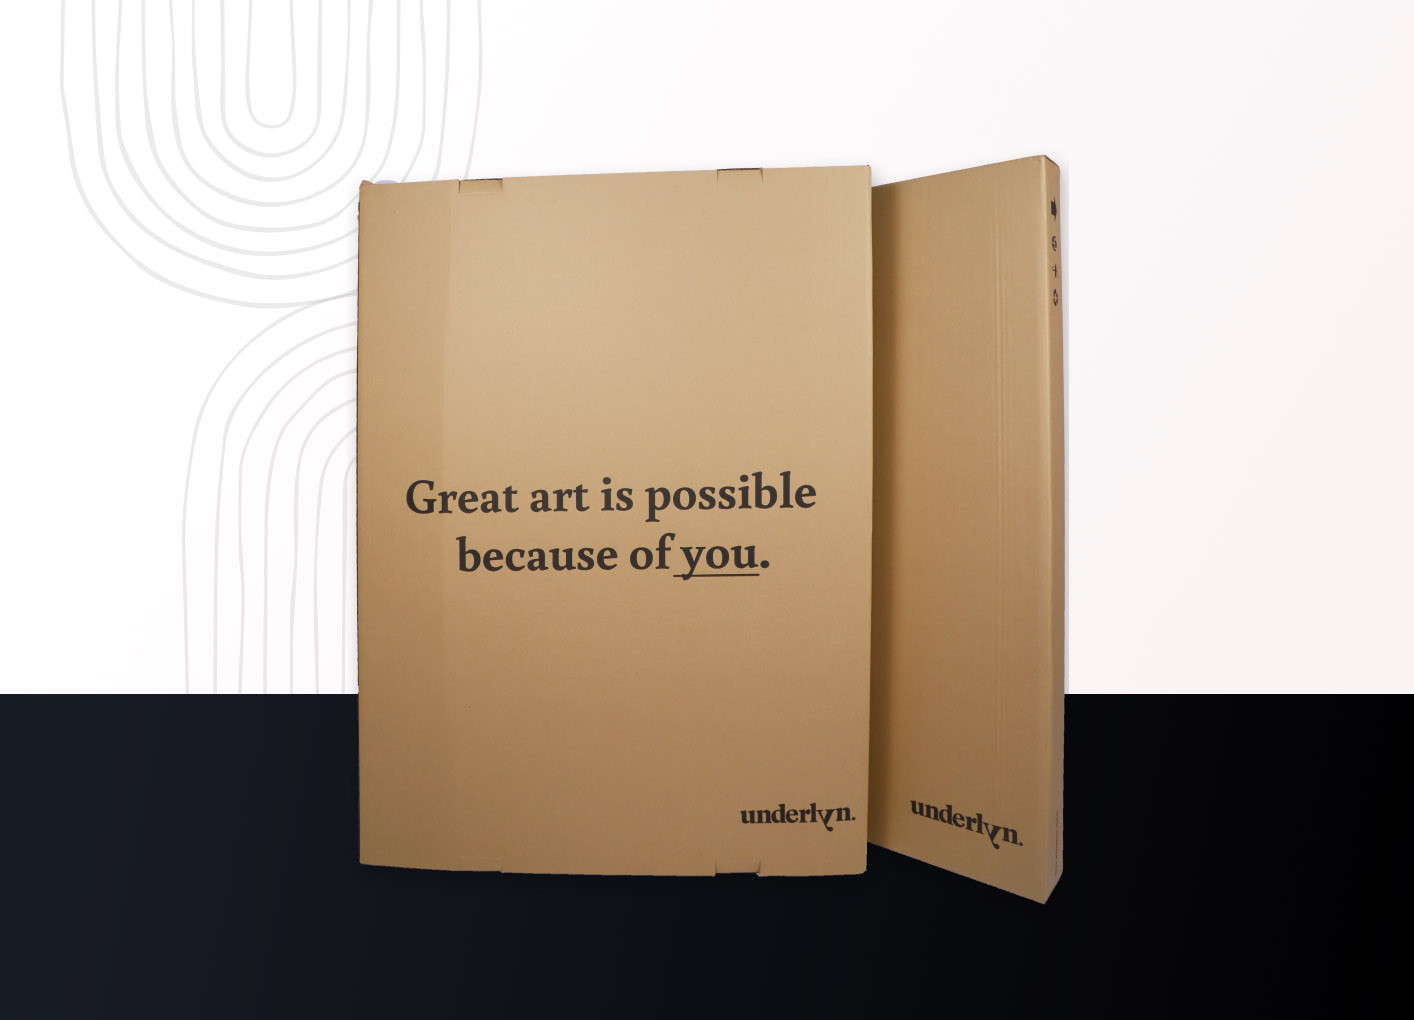 A brown cardboard packaging box featuring the words 'Great art is possible because of you,' containing the exquisite kantha embroidery artwork 'Meet you after midnight.' The box adds a touch of rustic charm while acknowledging the invaluable role of art e